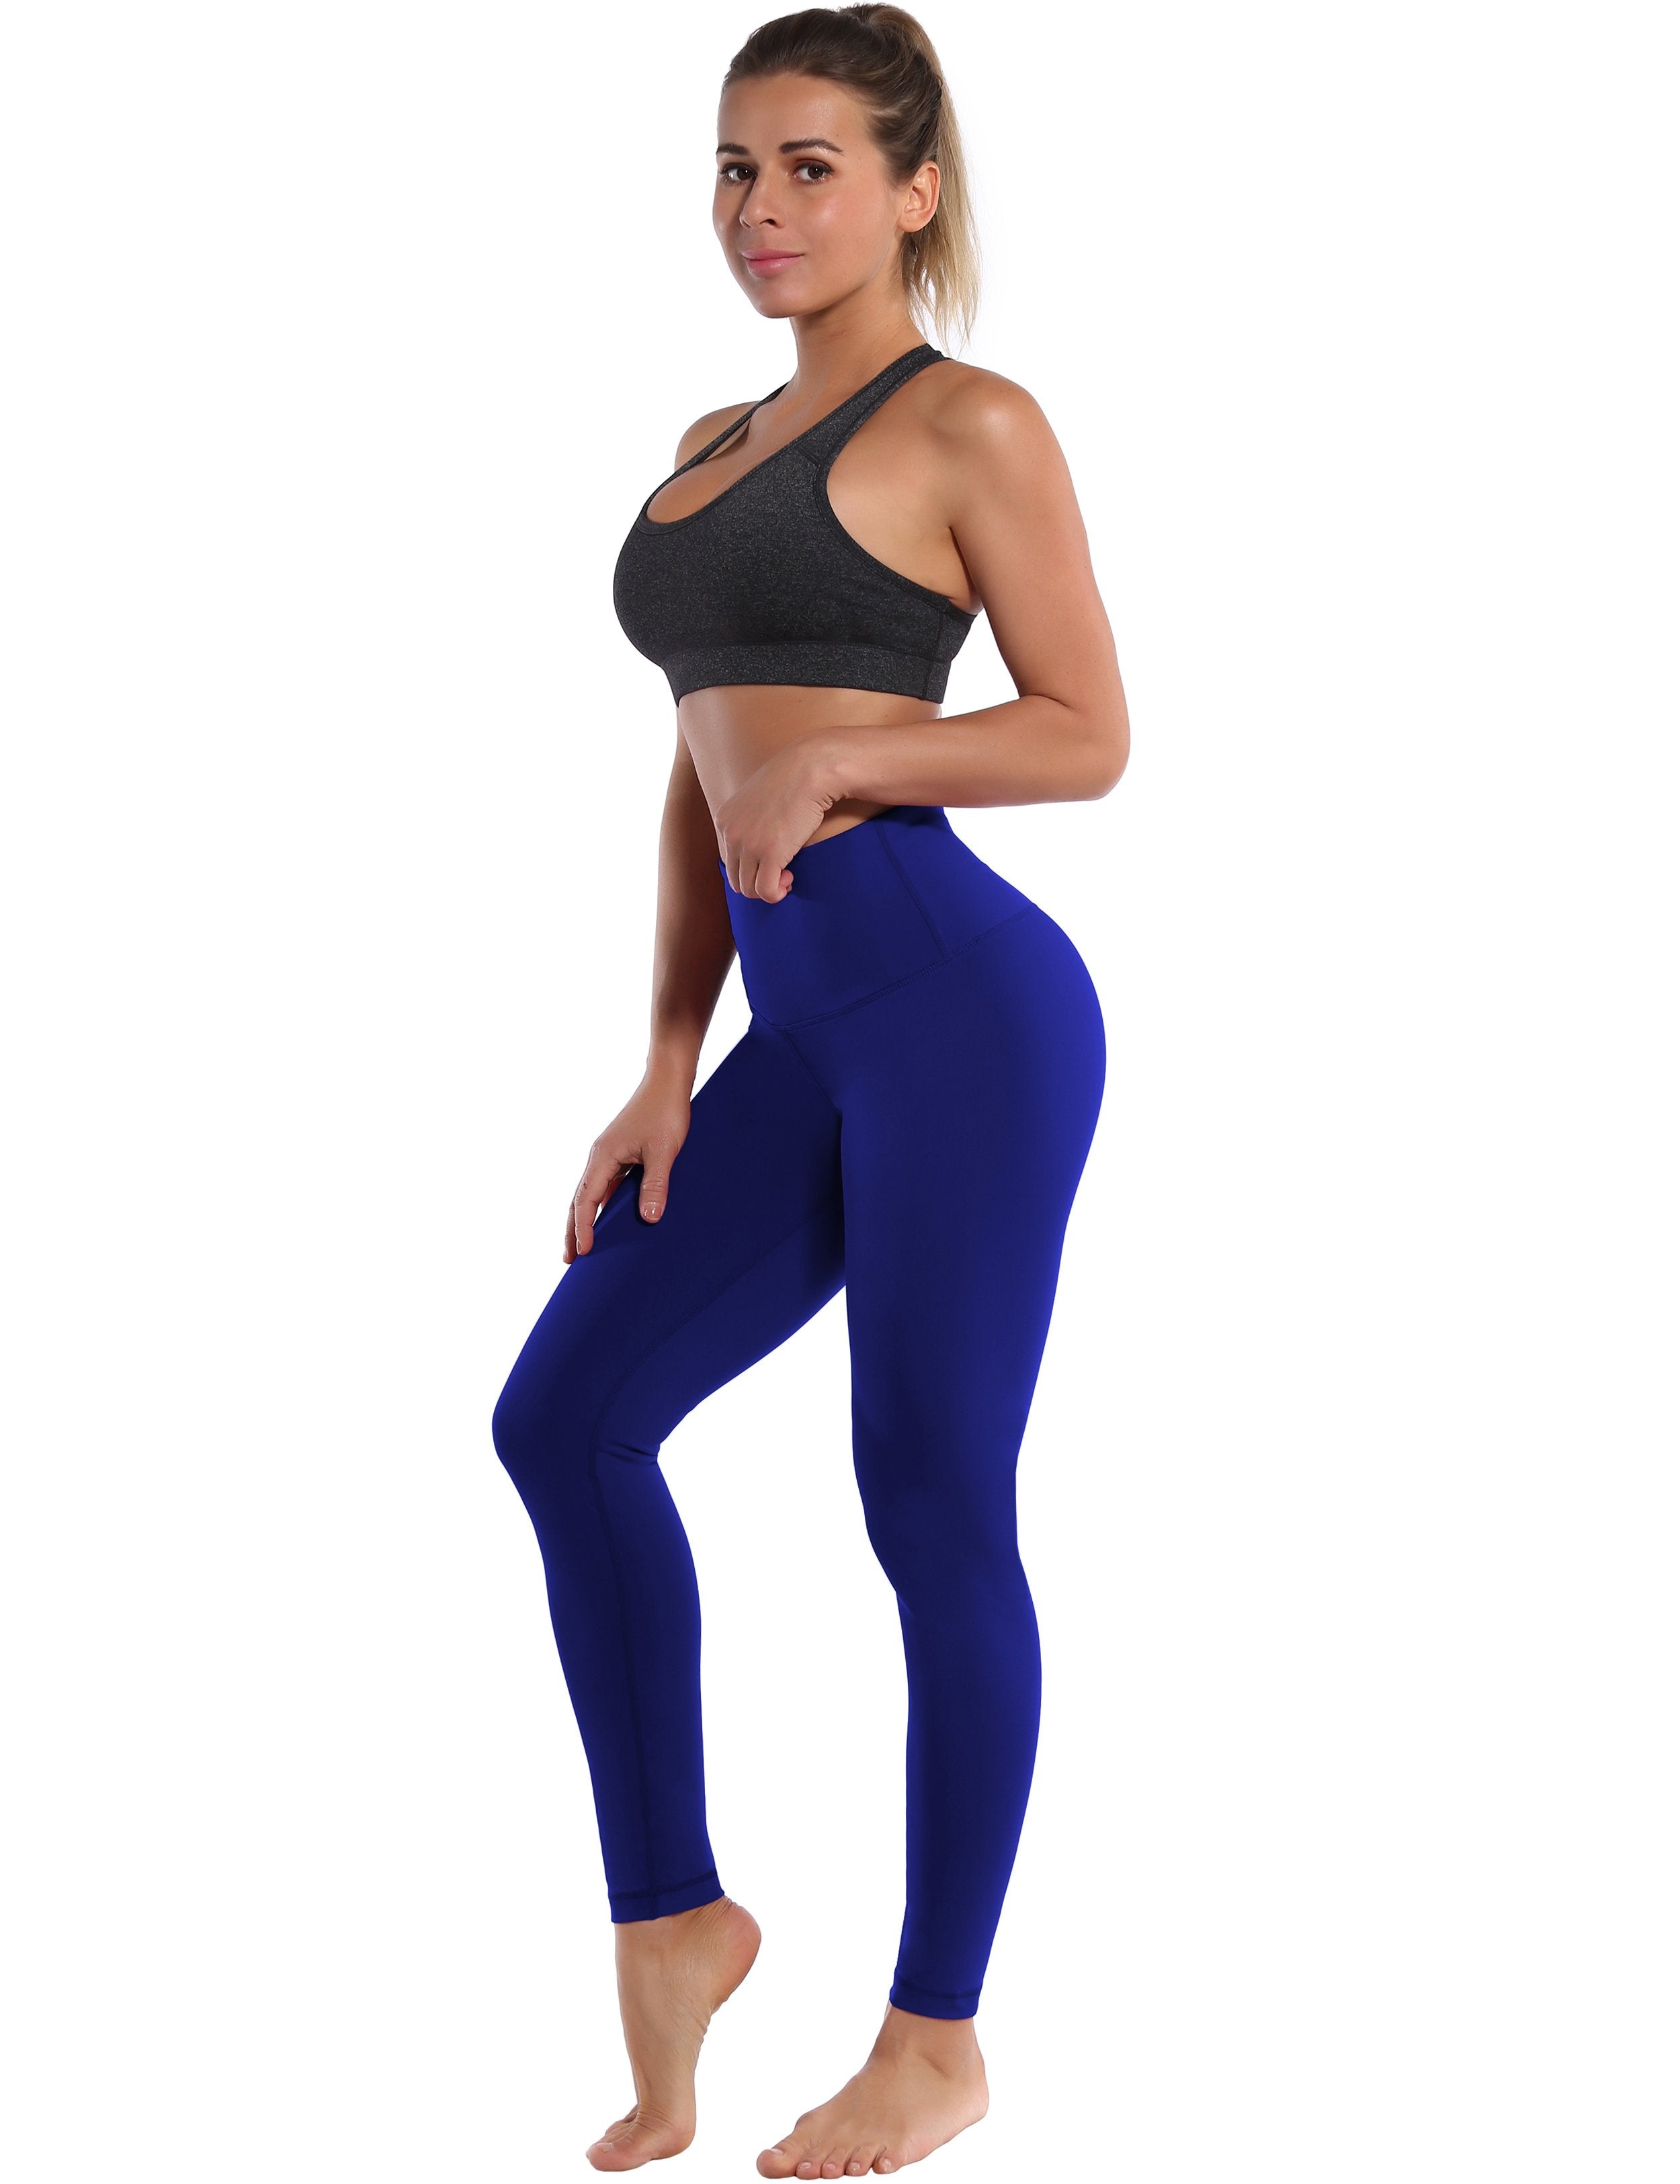 High Waist Gym Pants navy 75%Nylon/25%Spandex Fabric doesn't attract lint easily 4-way stretch No see-through Moisture-wicking Tummy control Inner pocket Four lengths